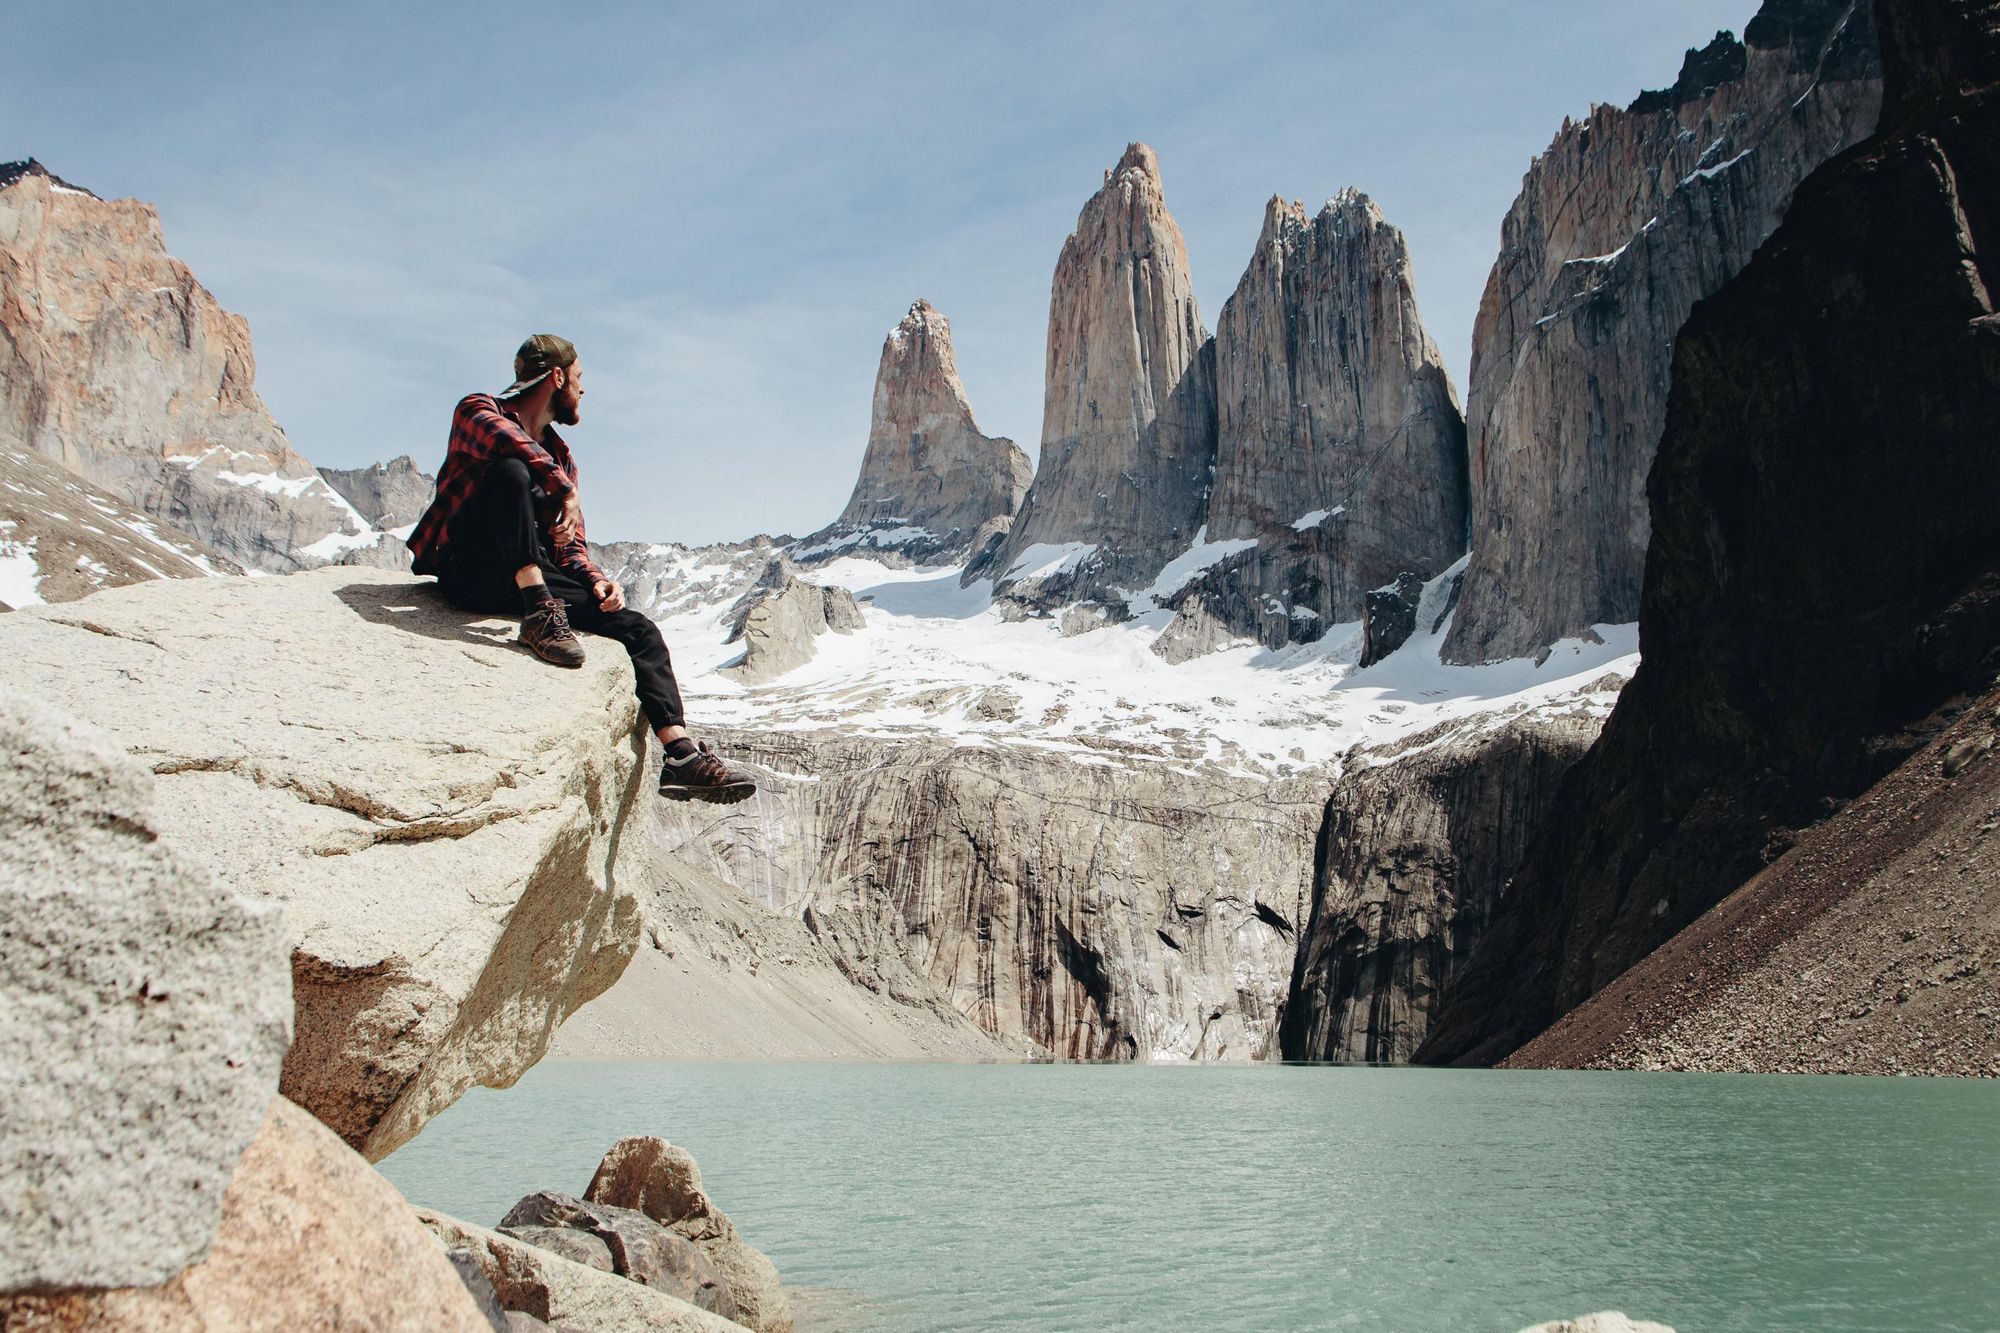 The base of the Towers (Base Las Torres) in Torres del Paine National Park, Chilean Patagonia. Photo: Getty